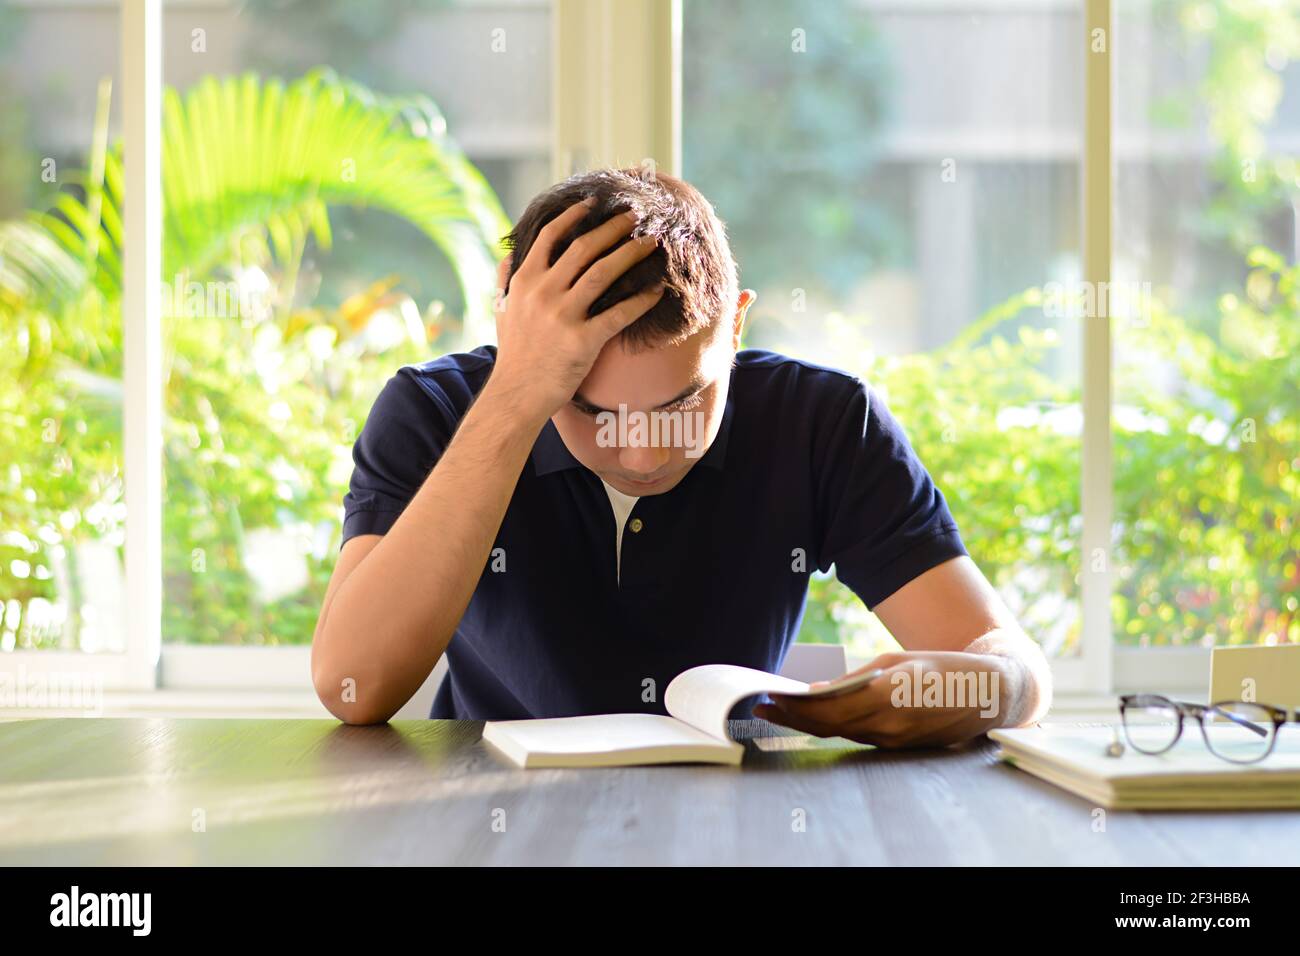 Stressed man reading book with hand on his head - studying & examination concepts Stock Photo